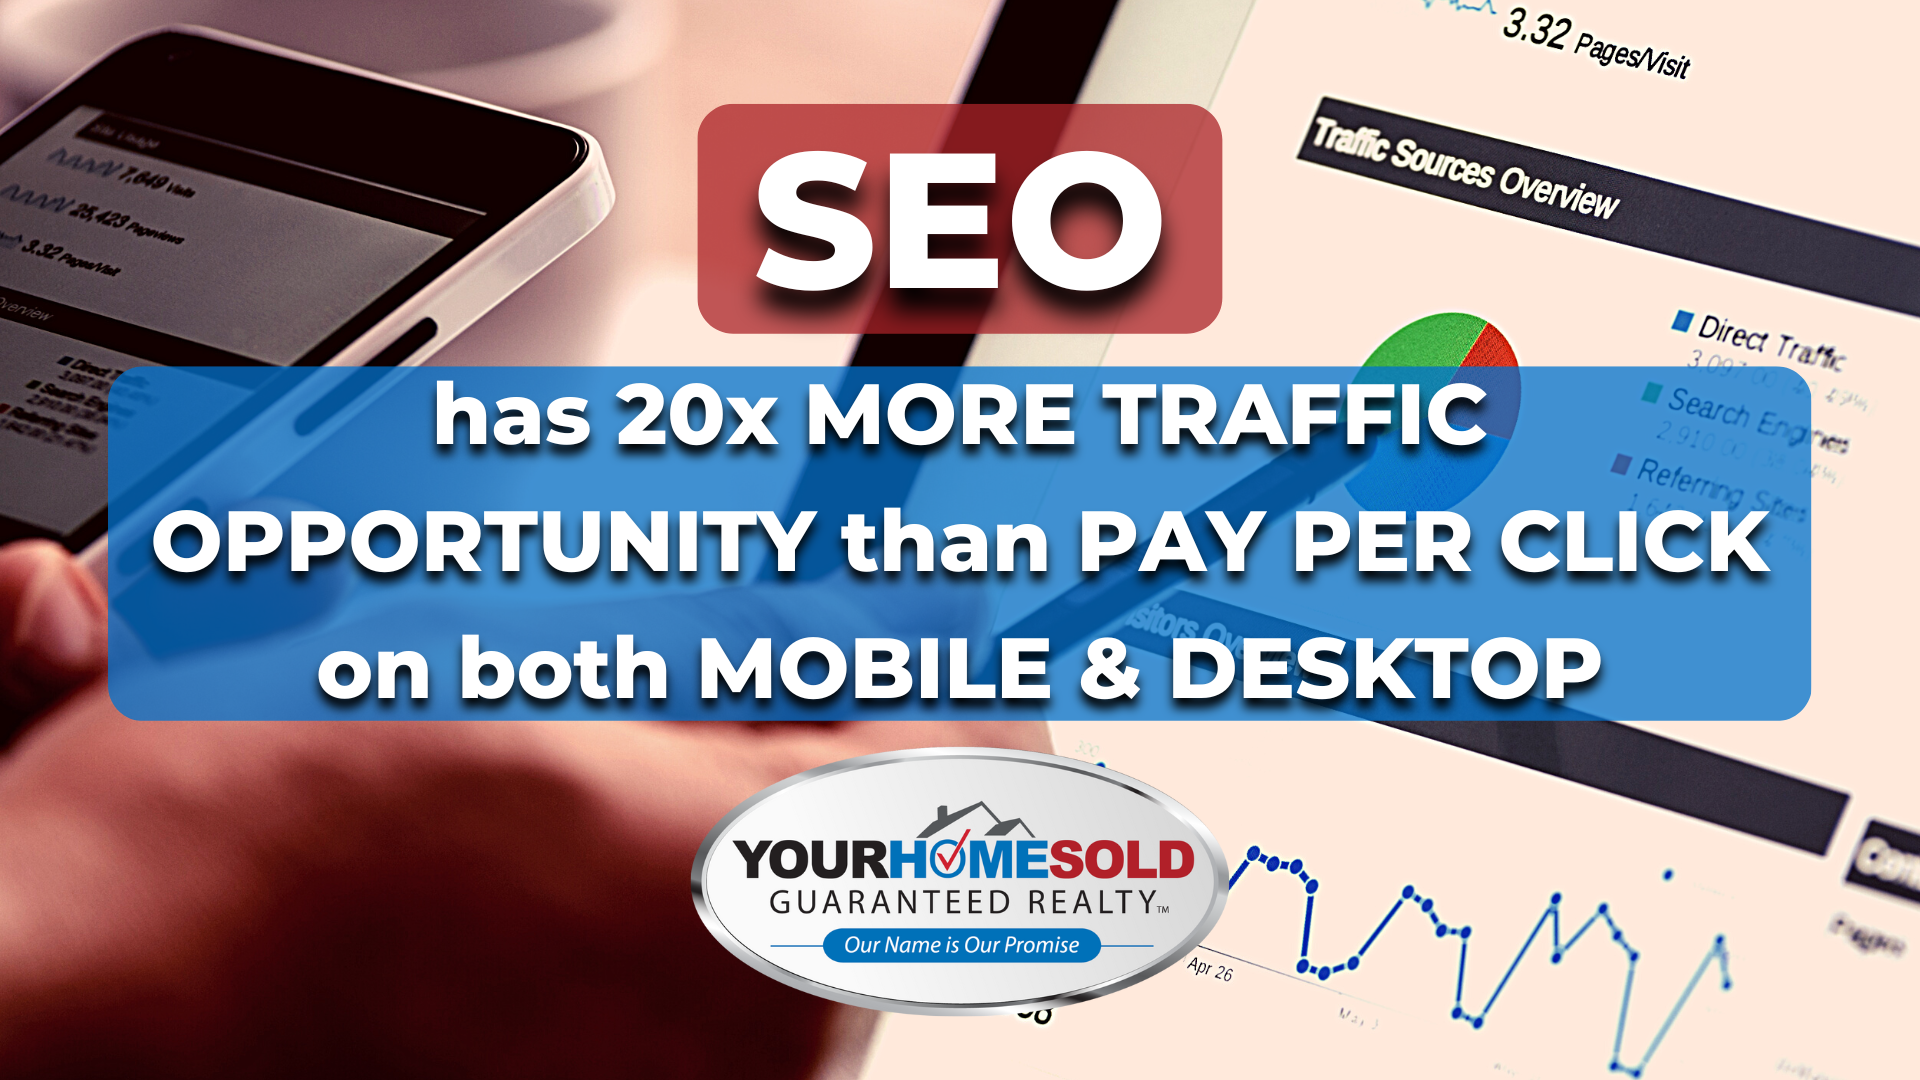 Your-Home-Sold-Guaranteed-Realty-helps-real-estate-agents-to-dominate-their-marketplaces-using-SEO-in-2023-1-1.png